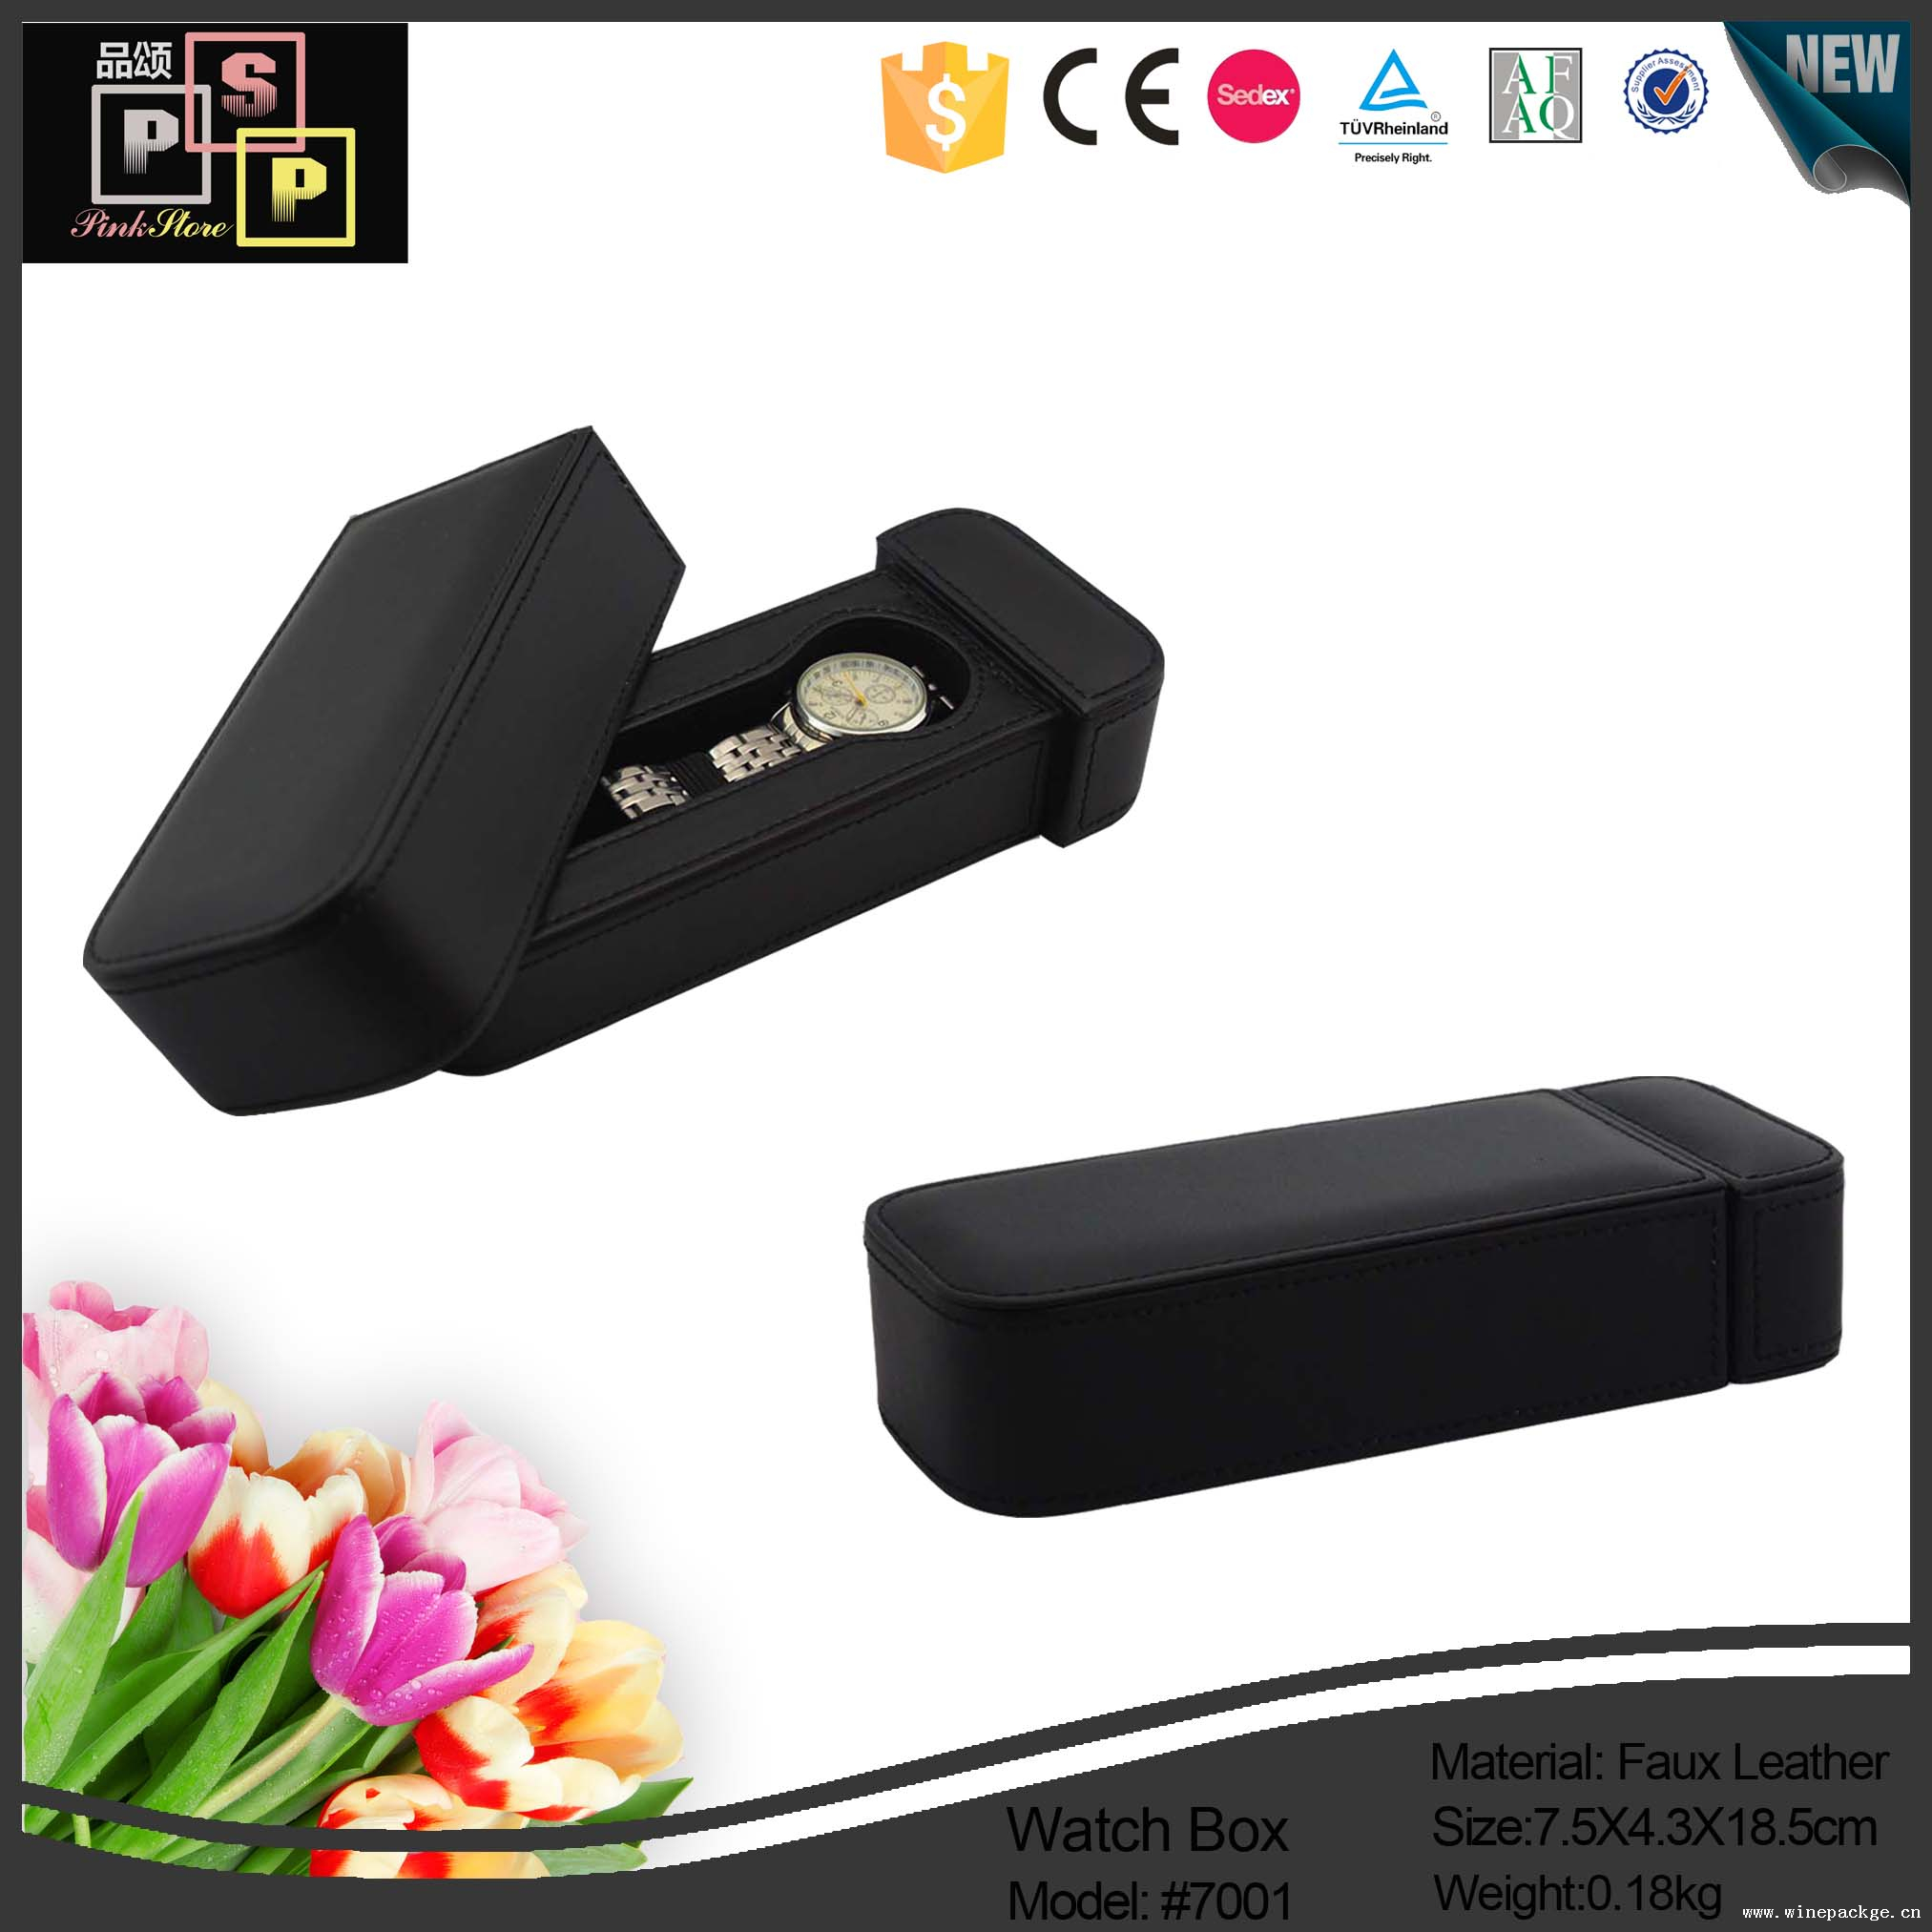 PU Leather Material and Stamping,Embossing, Printing leather watch box